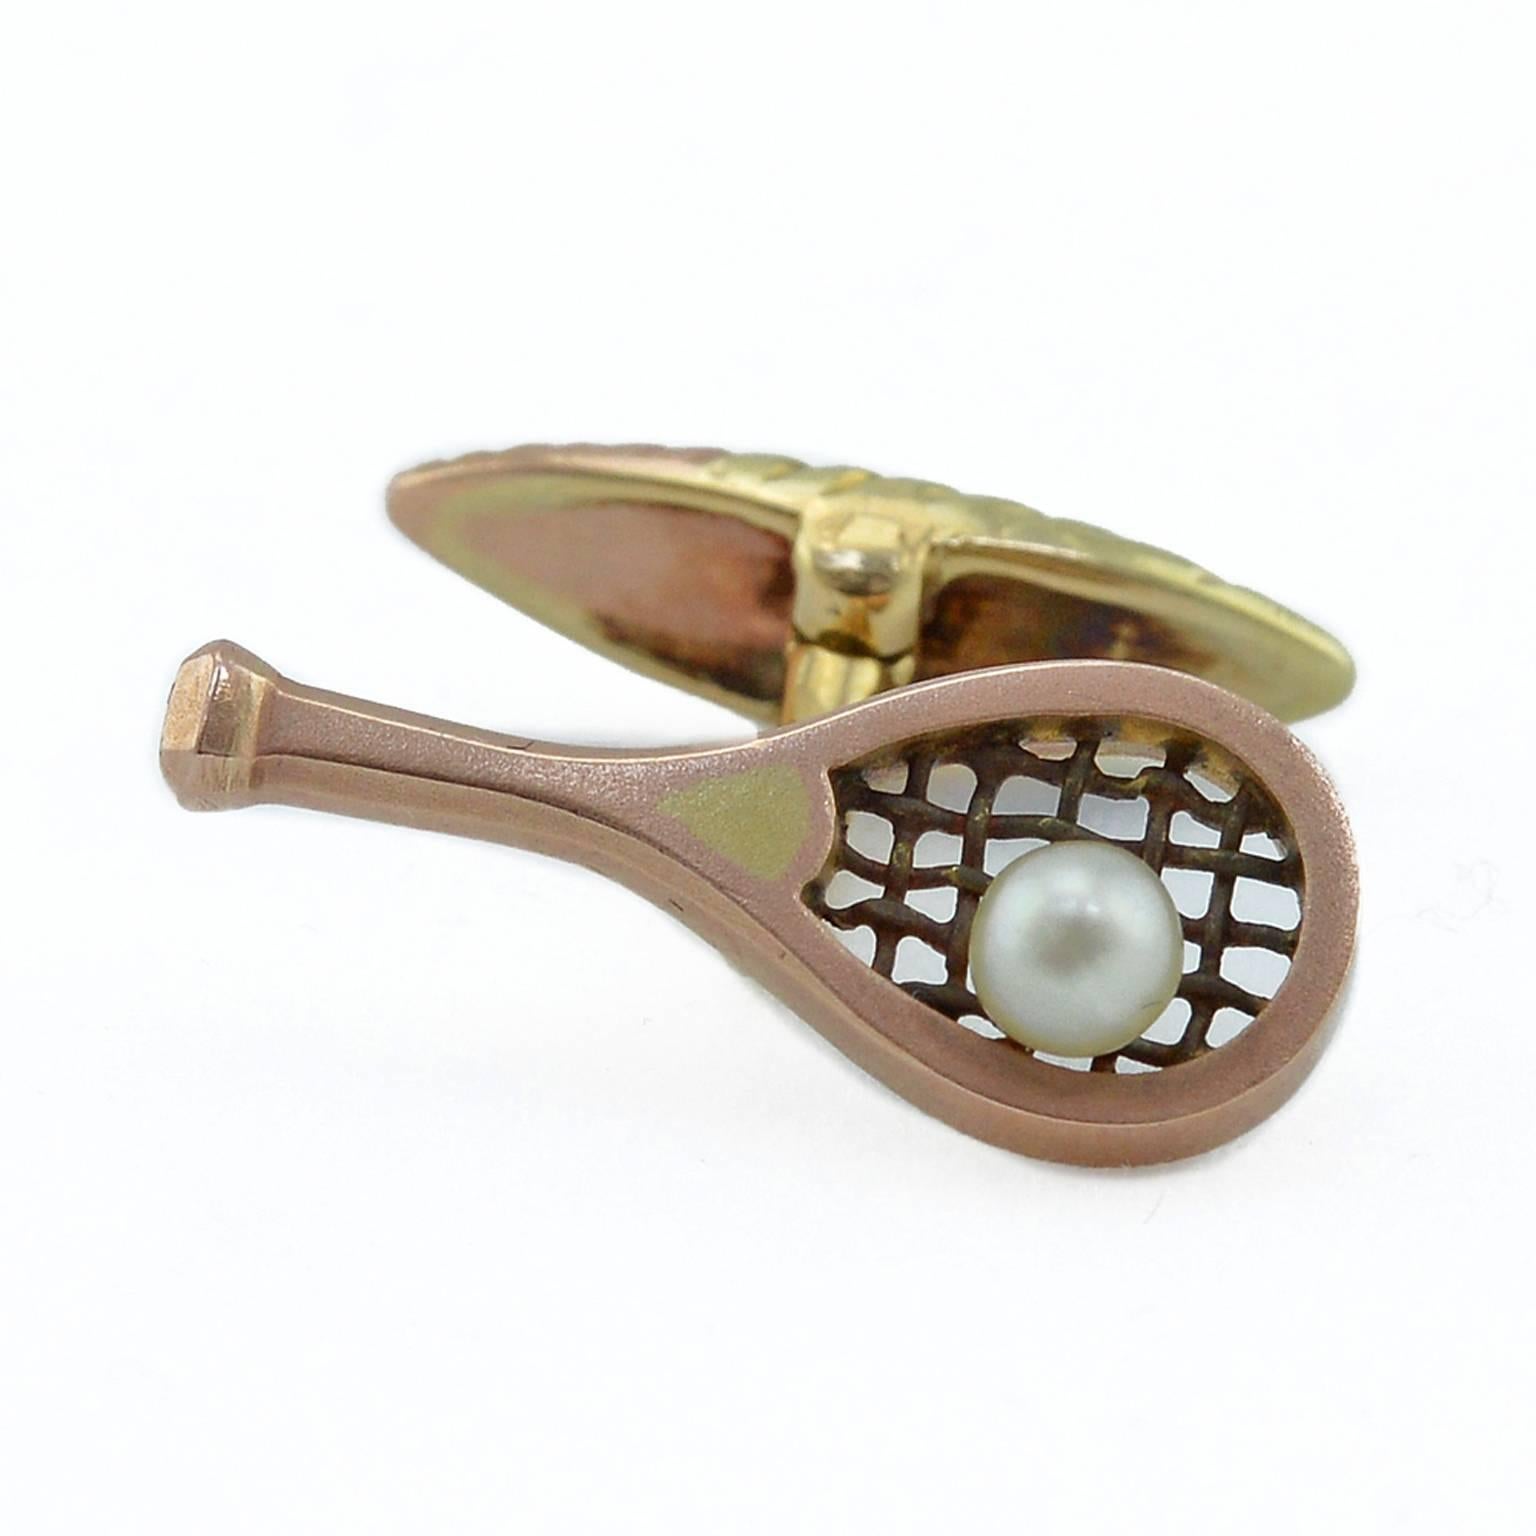 A pair of Russian varicolor gold and natural pearl cufflinks, Moscow, 1899-1908. The links formed as miniature rose gold tennis rackets, the black patinated gold strings set with a natural pearl in imitation of a tennis ball, the surface of the